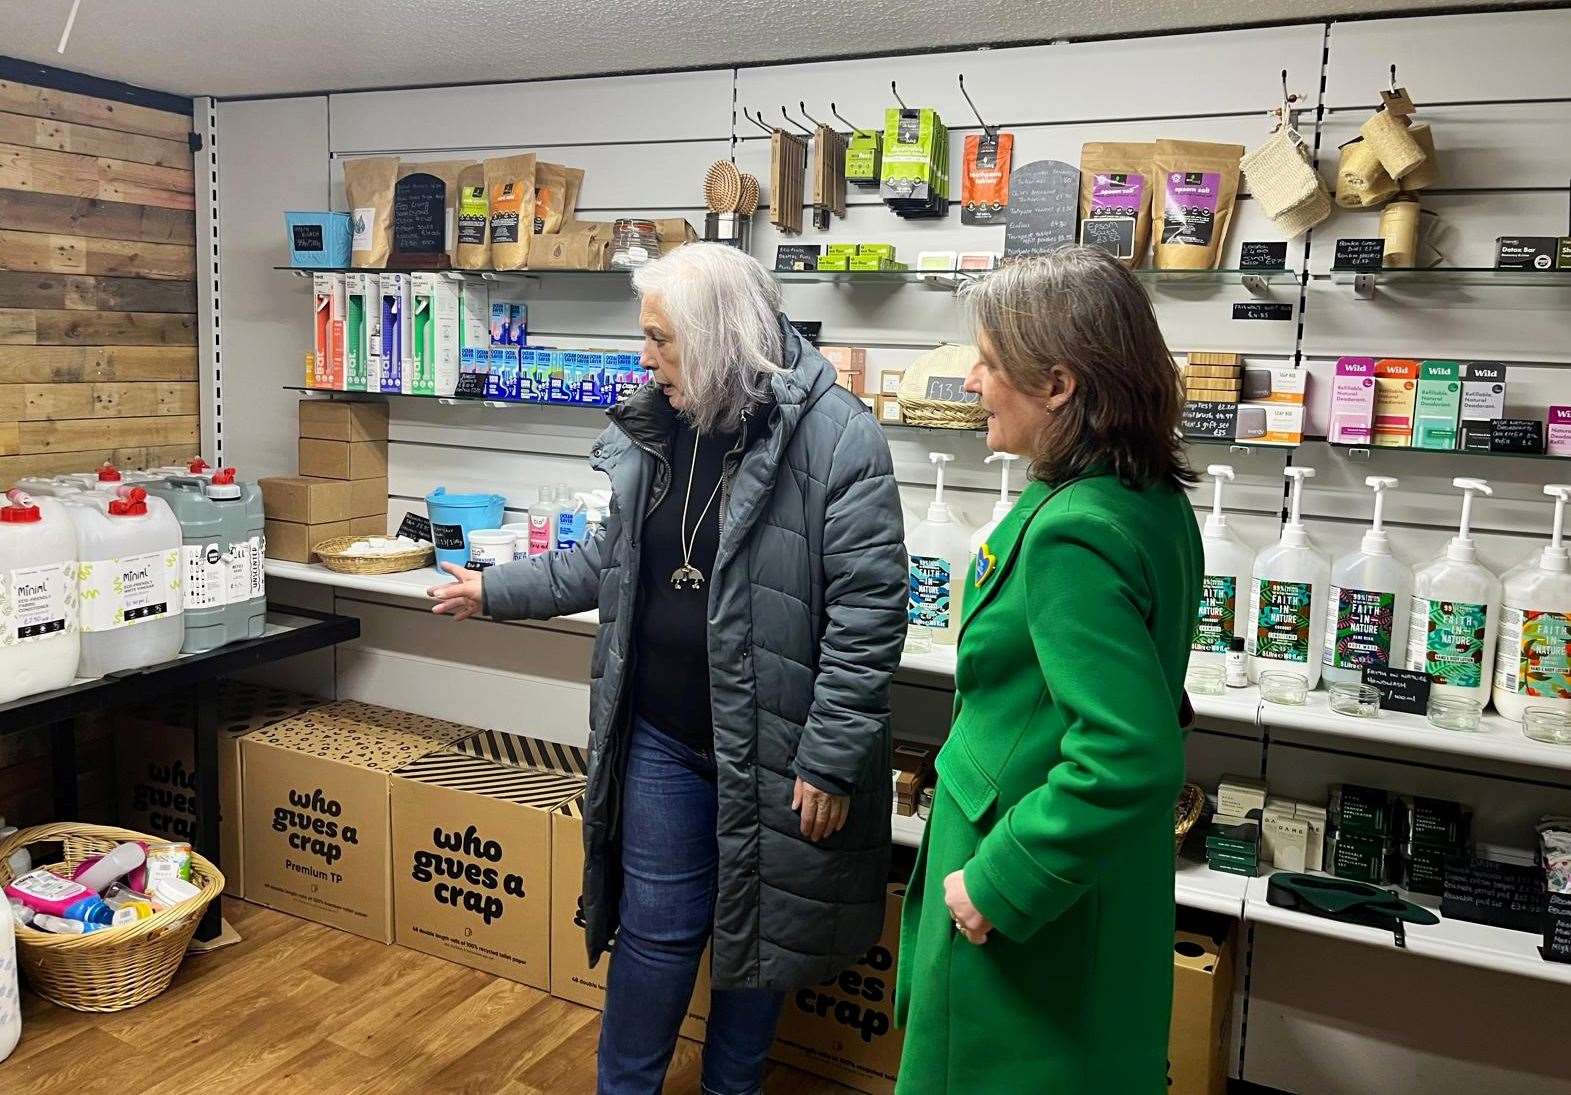 TCDT chairperson Helen Allan (left) showing Maree Todd MSP the Socially Growing refill shop in May last year.